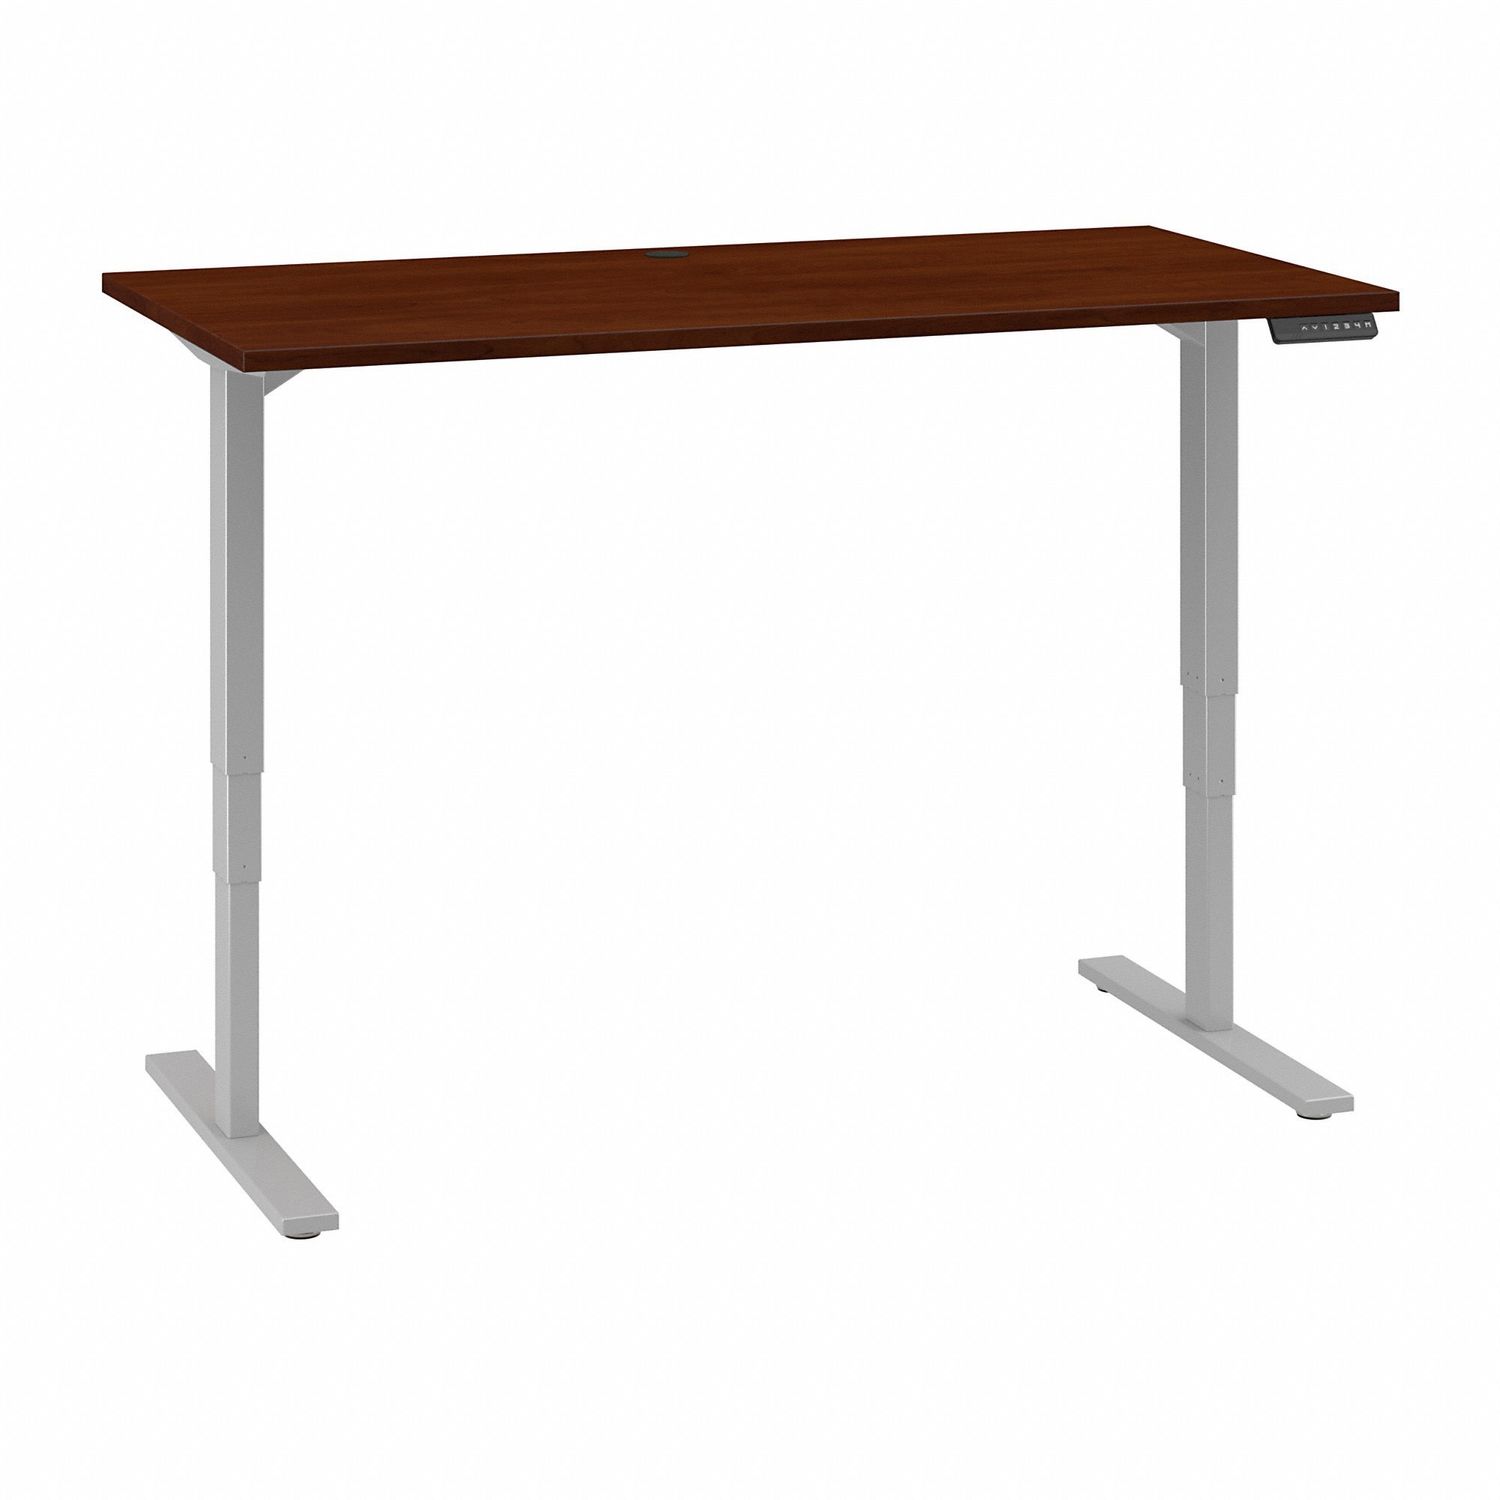 60W x 30D Height Adjustable Standing Desk Hansen Cherry Thermofused Laminate (TFL) Rectangle Top, Gray T-shaped Base, 2 Legs, 59.45" Table Top Width x 29.37" Table Top Depth, 49" Height